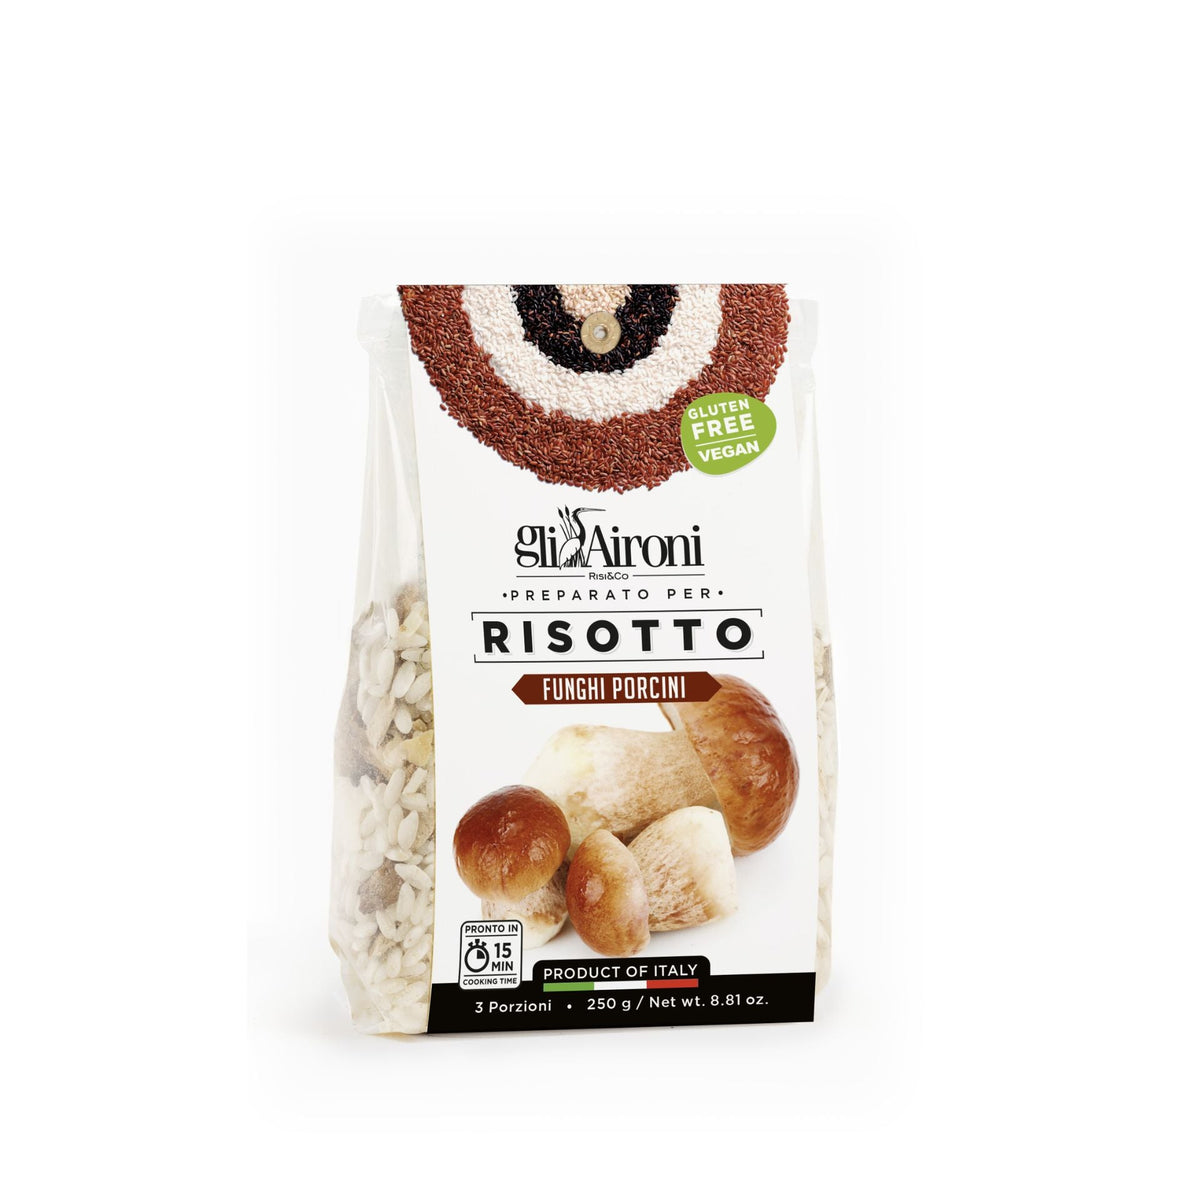 Gli Aironi Porcini Mushroom Risotto 250g (Bag)  | Imported and distributed in the UK by Just Gourmet Foods